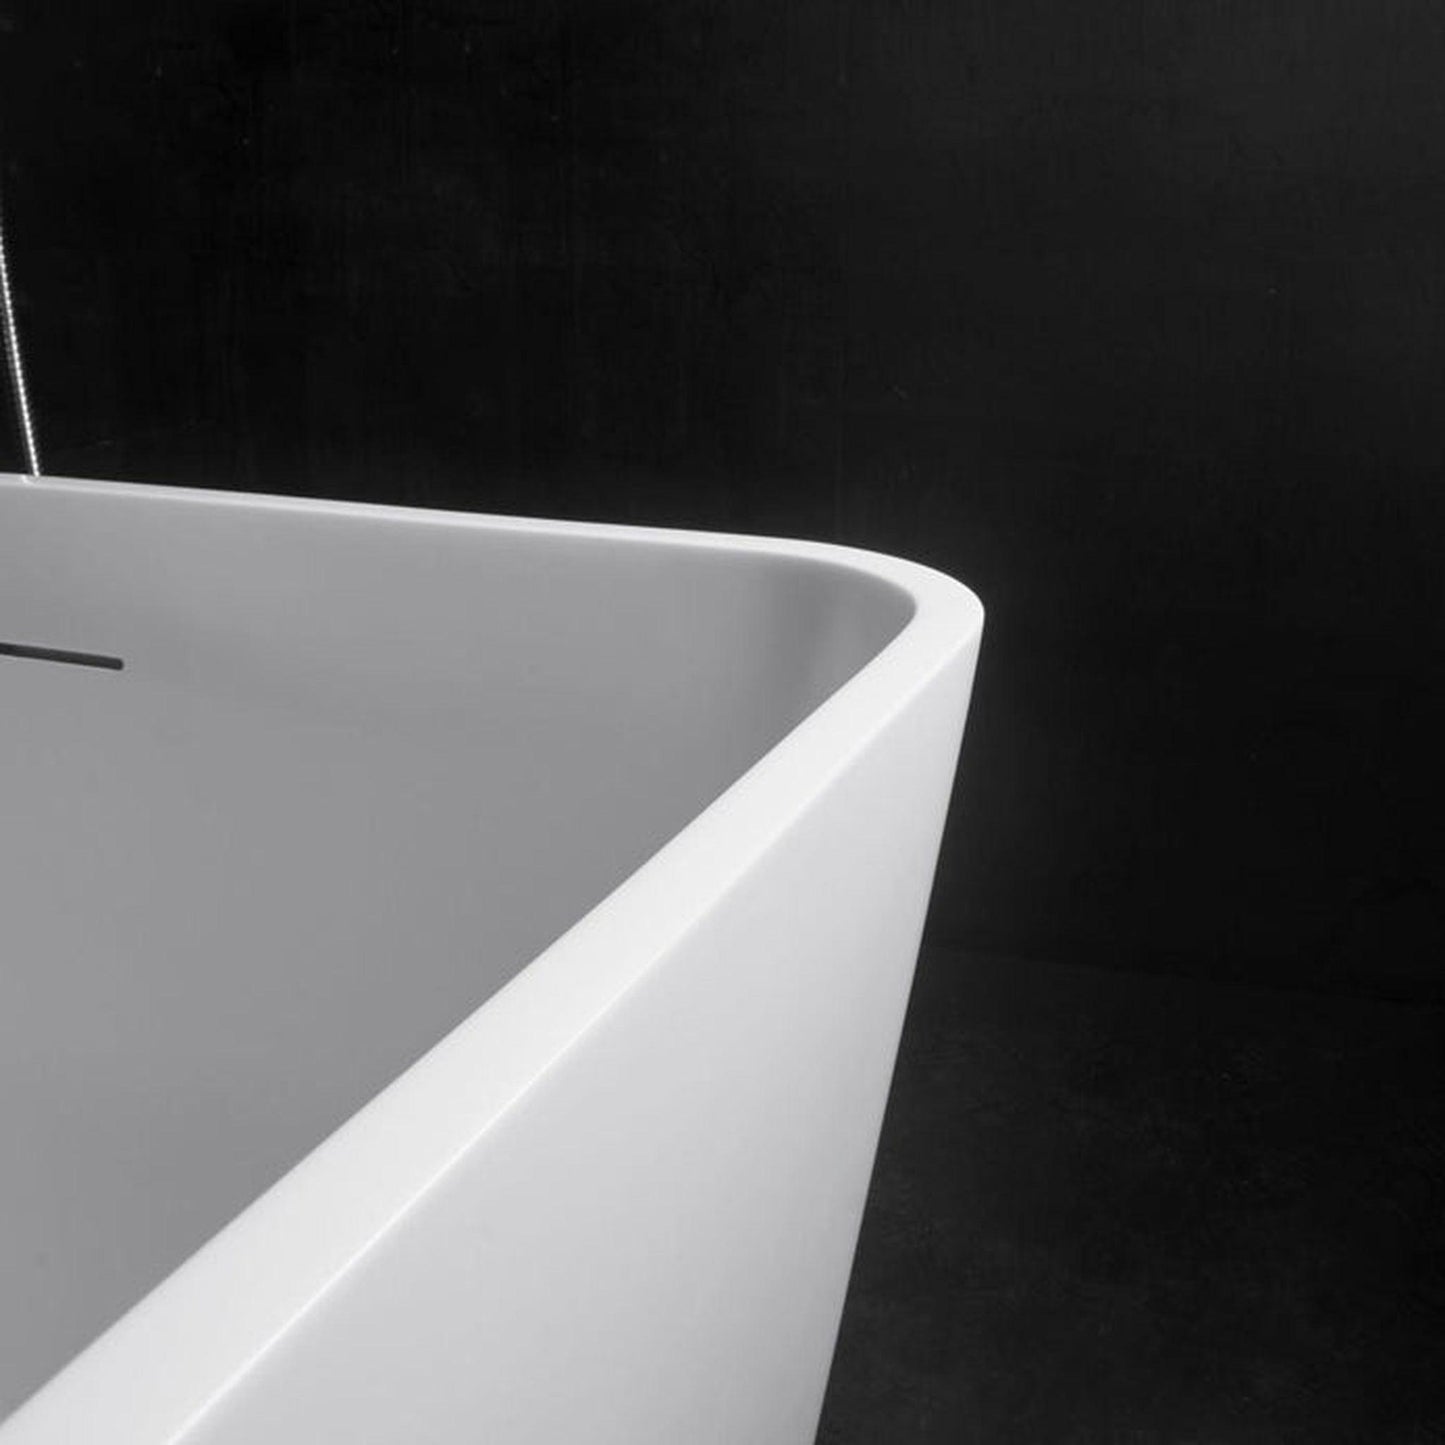 Vanity Art 59" Glossy White Solid Surface Resin Stone Freestanding Soaking Tub With Slotted Overflow and Pop-up Drain